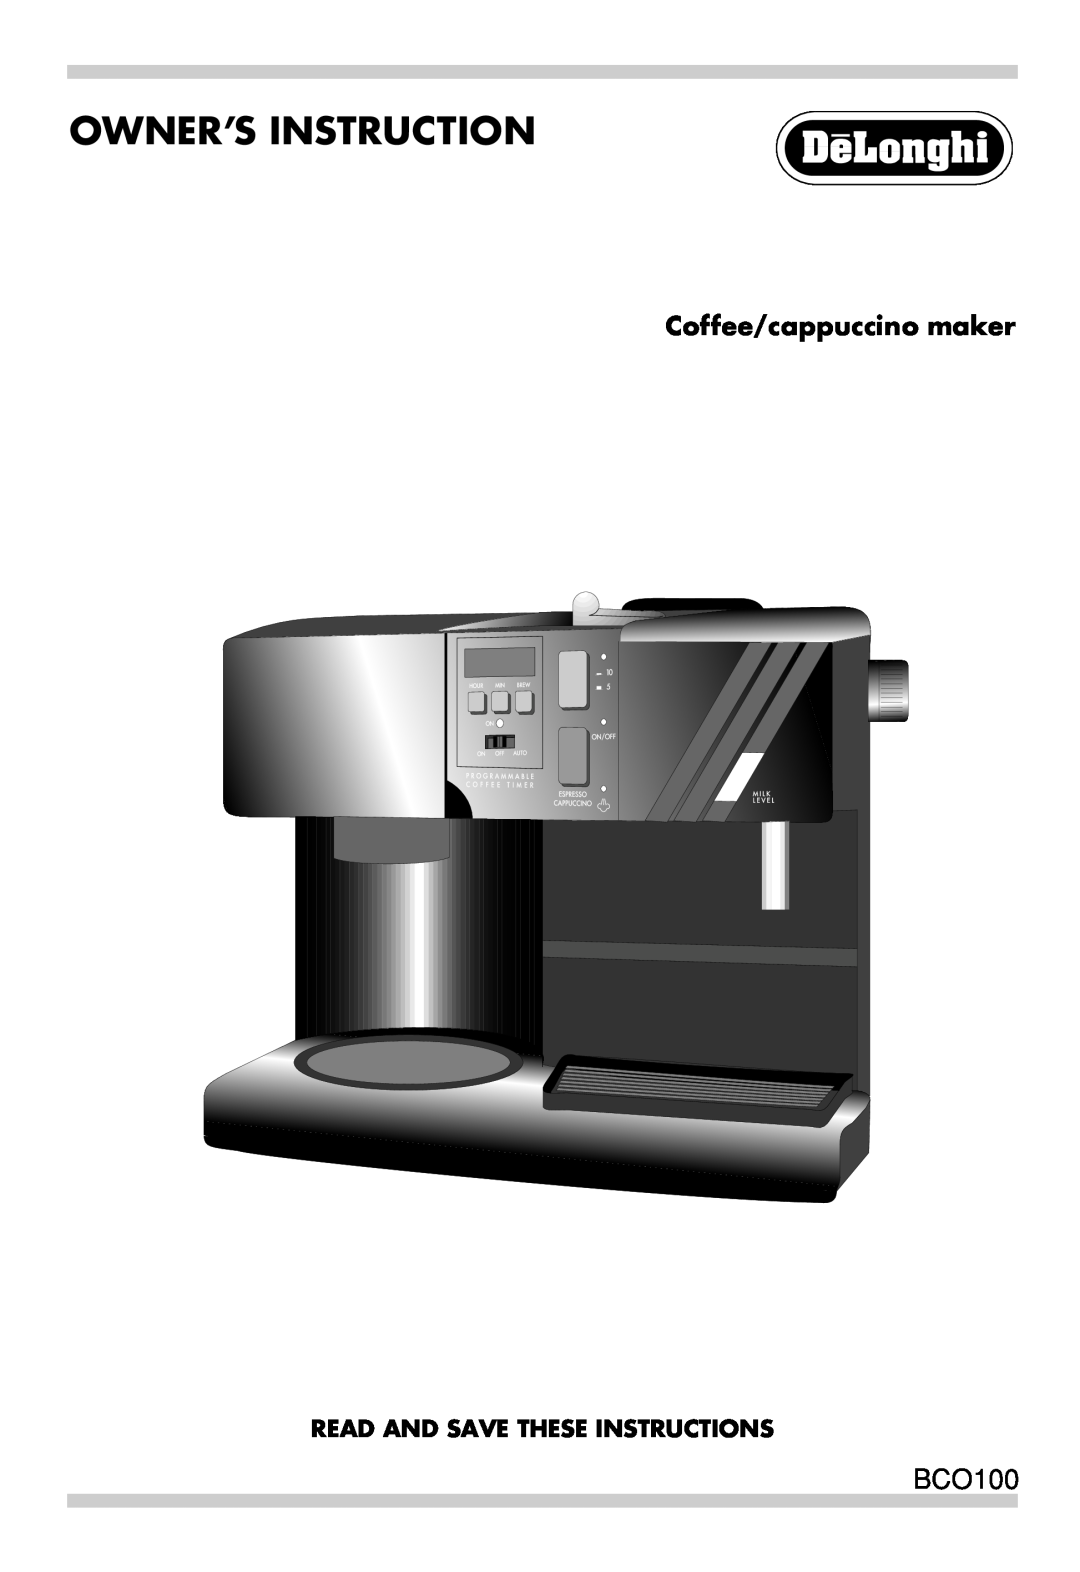 DeLonghi BCO100 manual Owner’S Instruction, Coffee/cappuccino maker, Read And Save These Instructions 